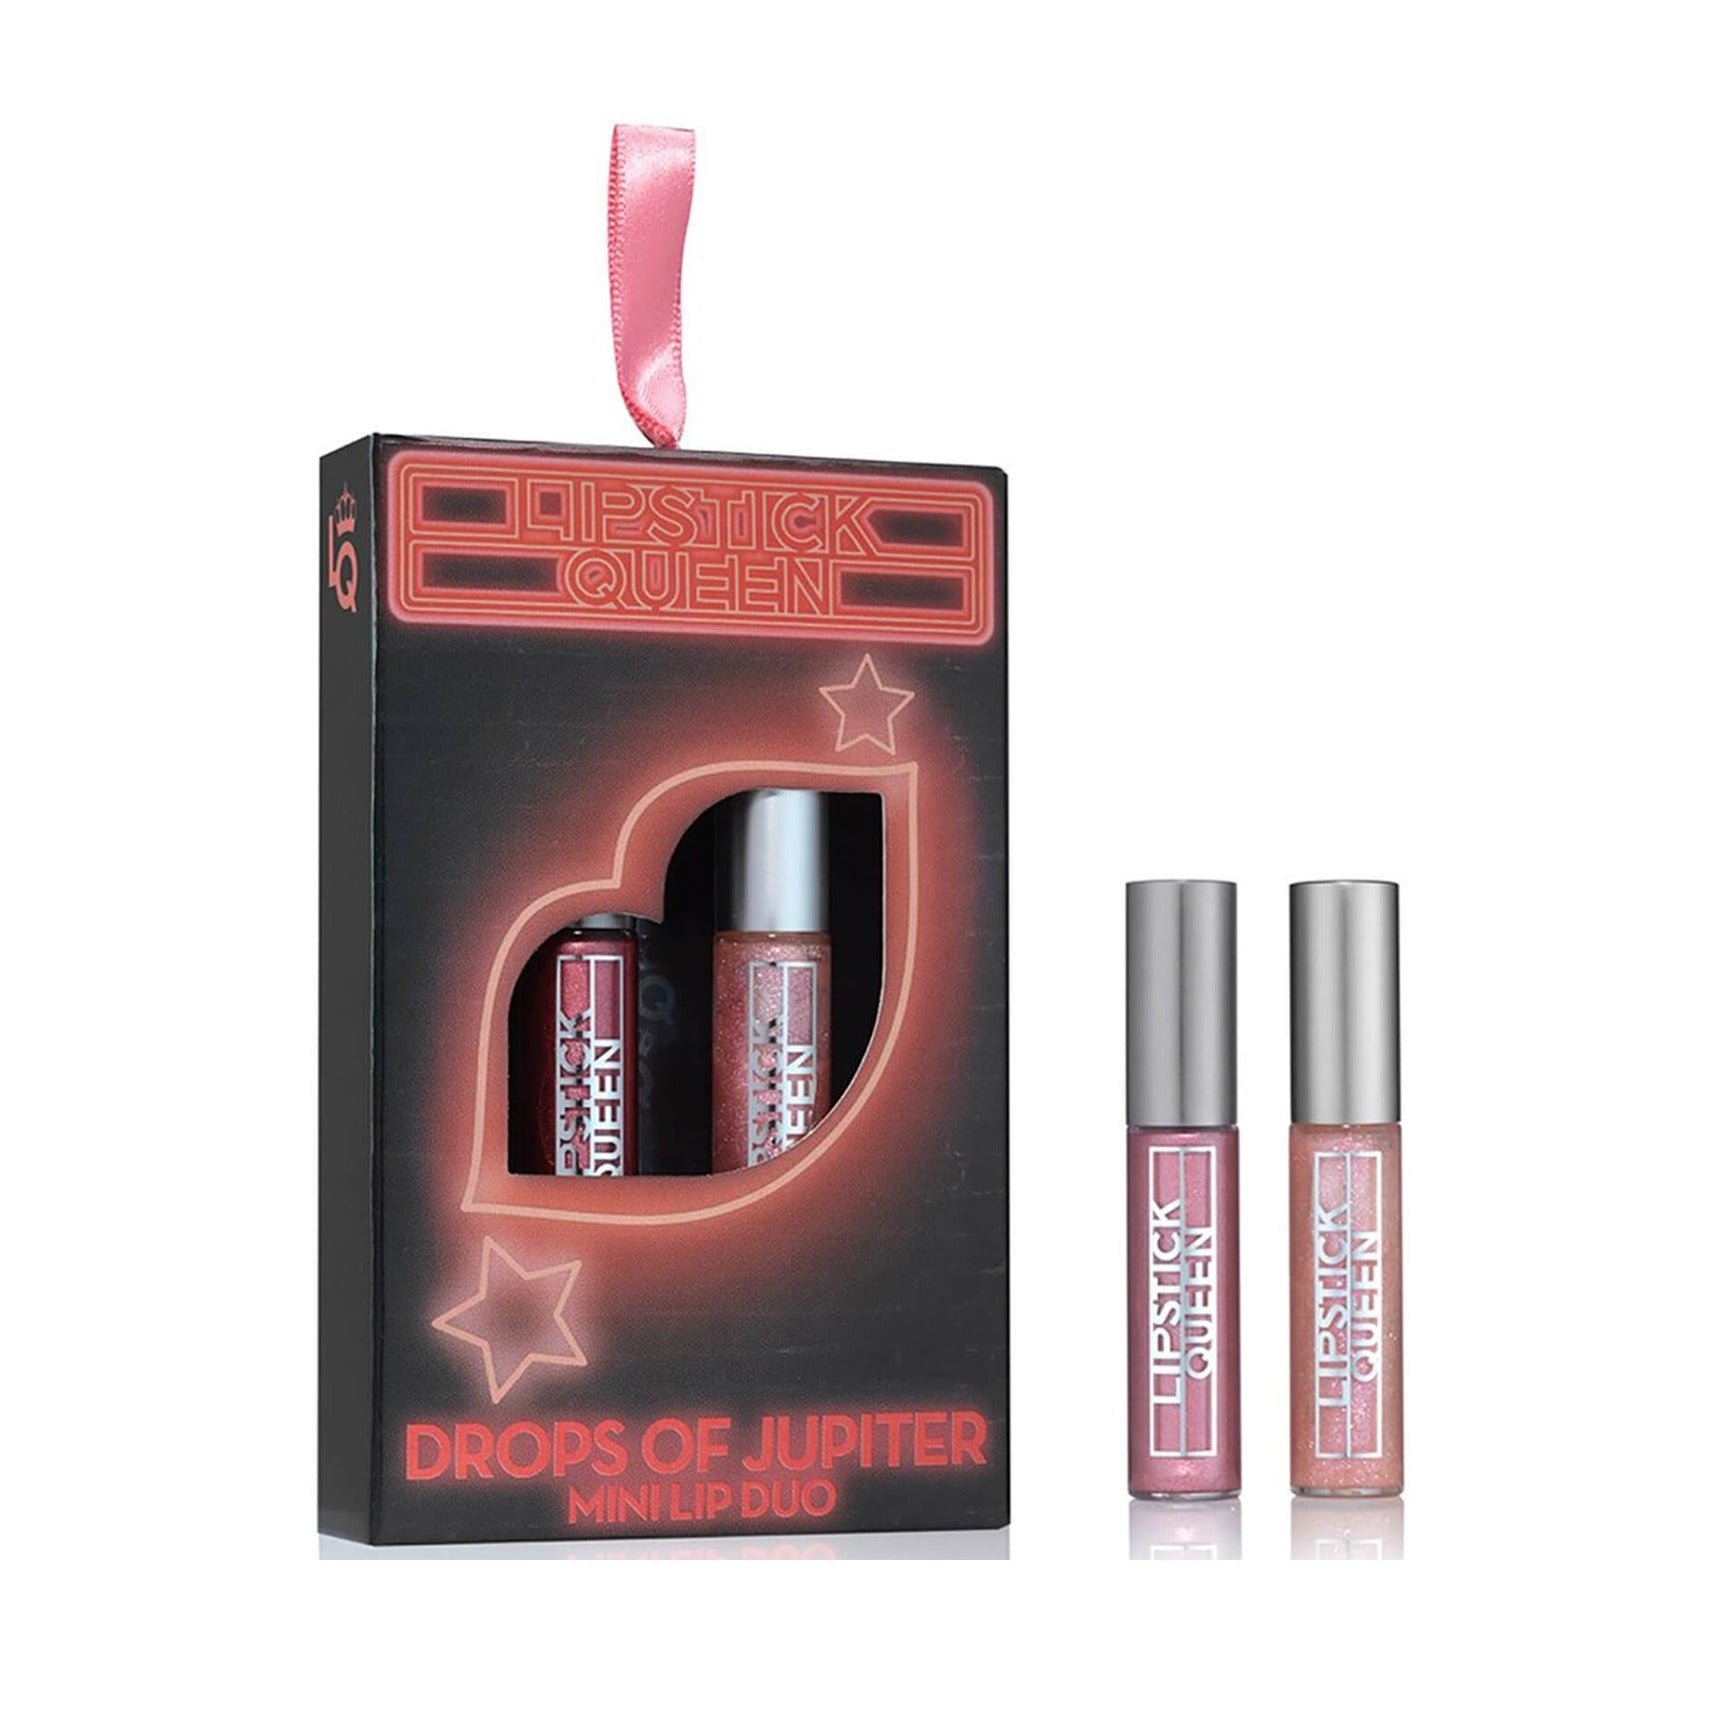 Lipstick Queen Drops Of Jupiter in the color Time warp & Supernova Gift Set Limited Edition